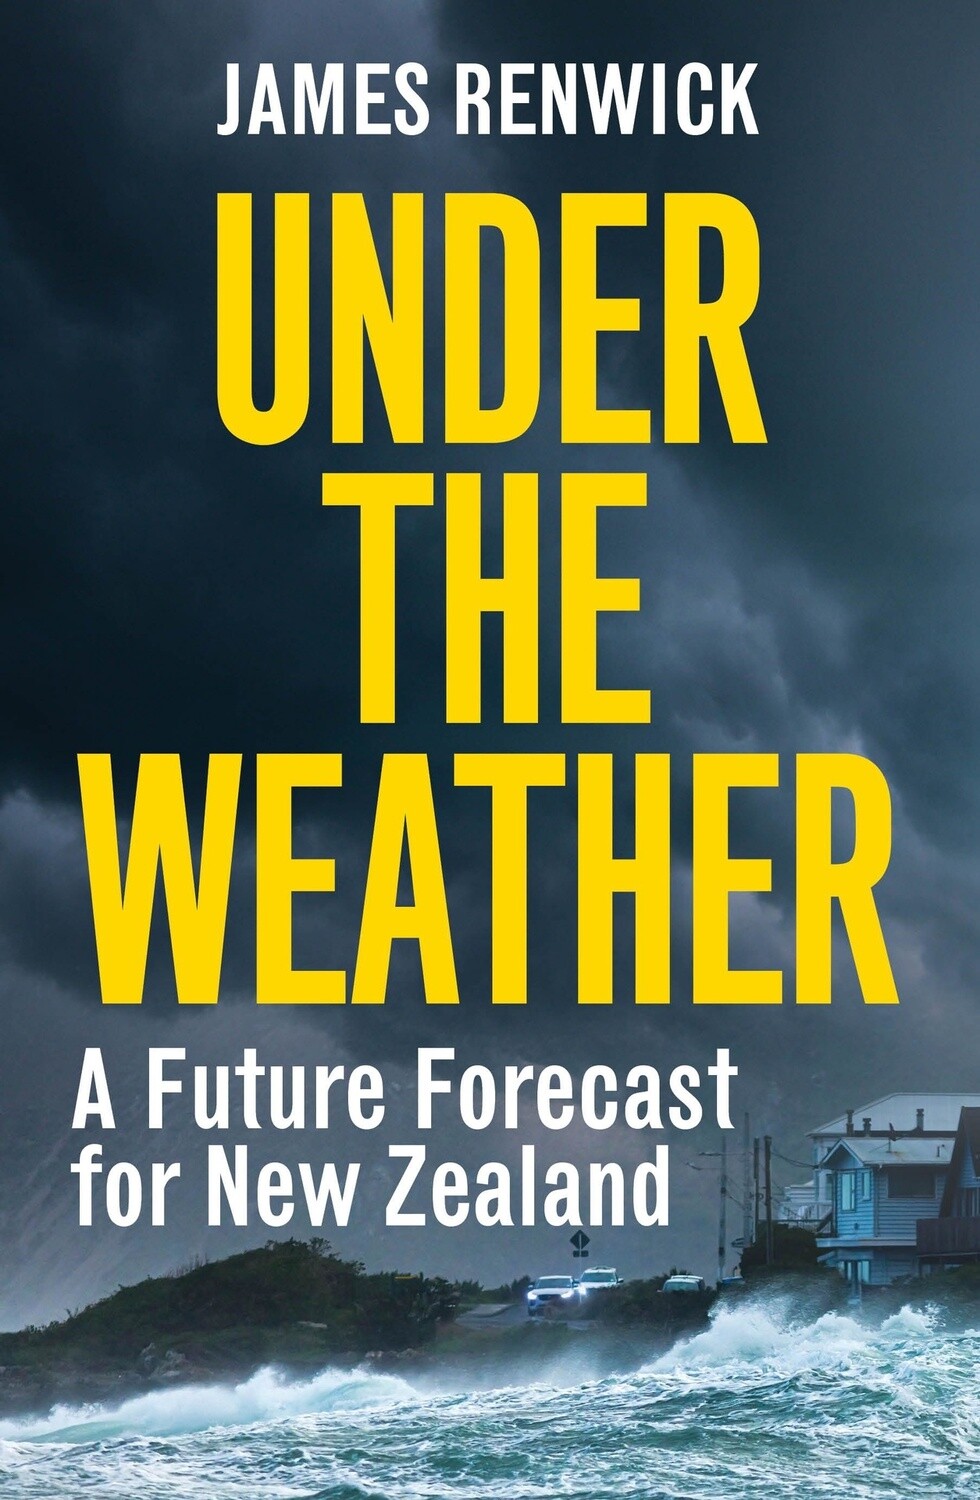 Under The Weather: A future forecast for New Zealand by James Renwick